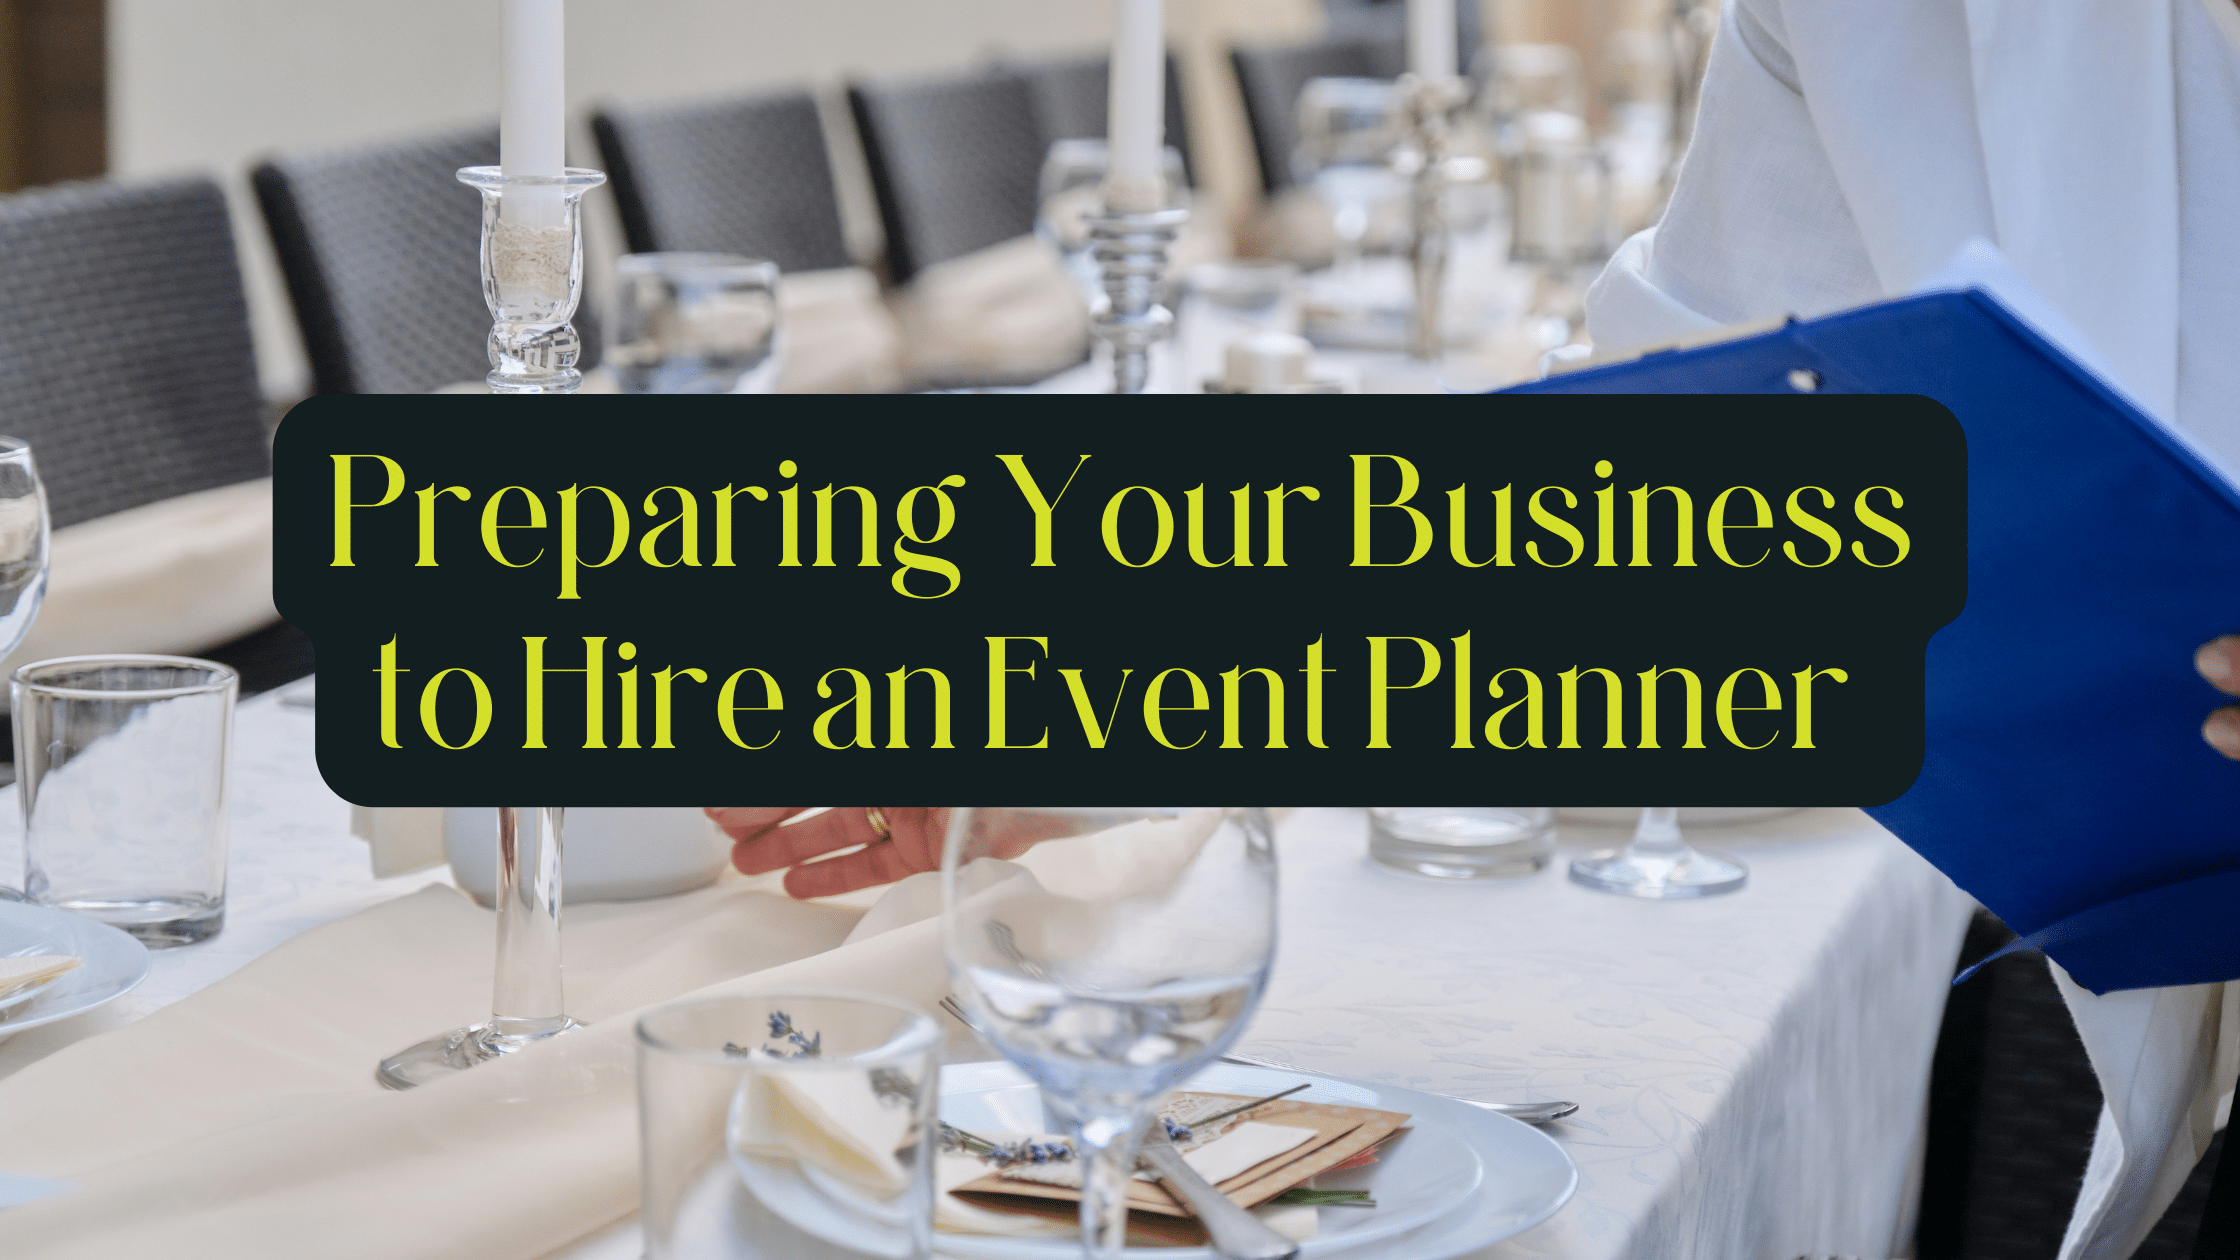 Hire an event planner